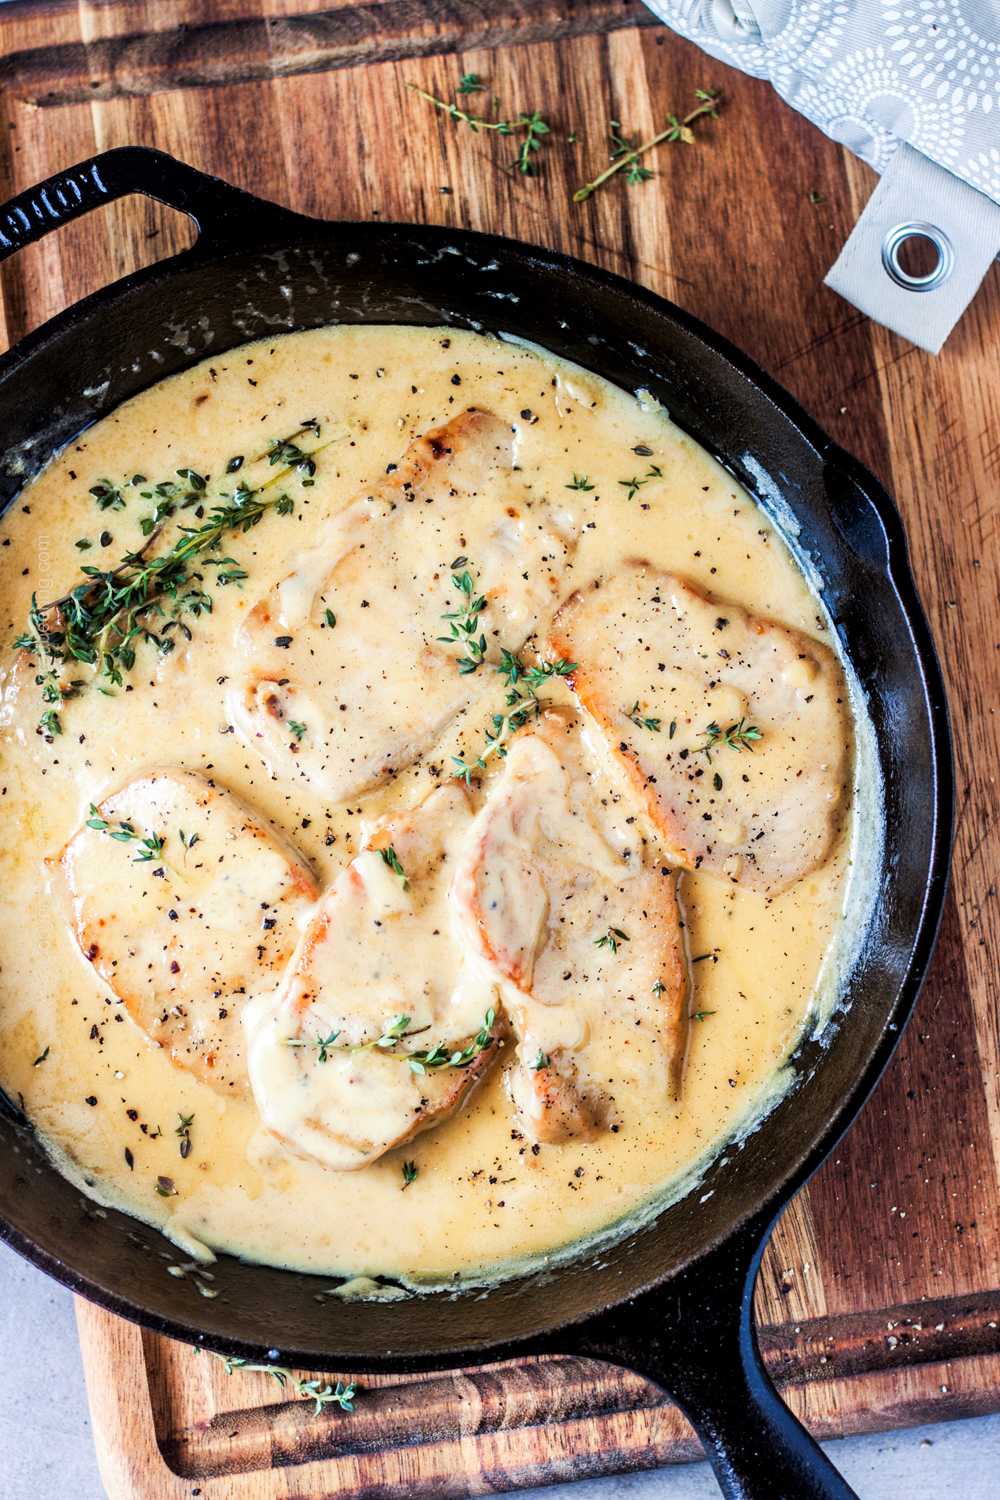 Stove top thin pork chops with creamy sauce, one of the best pork cutlet recipes